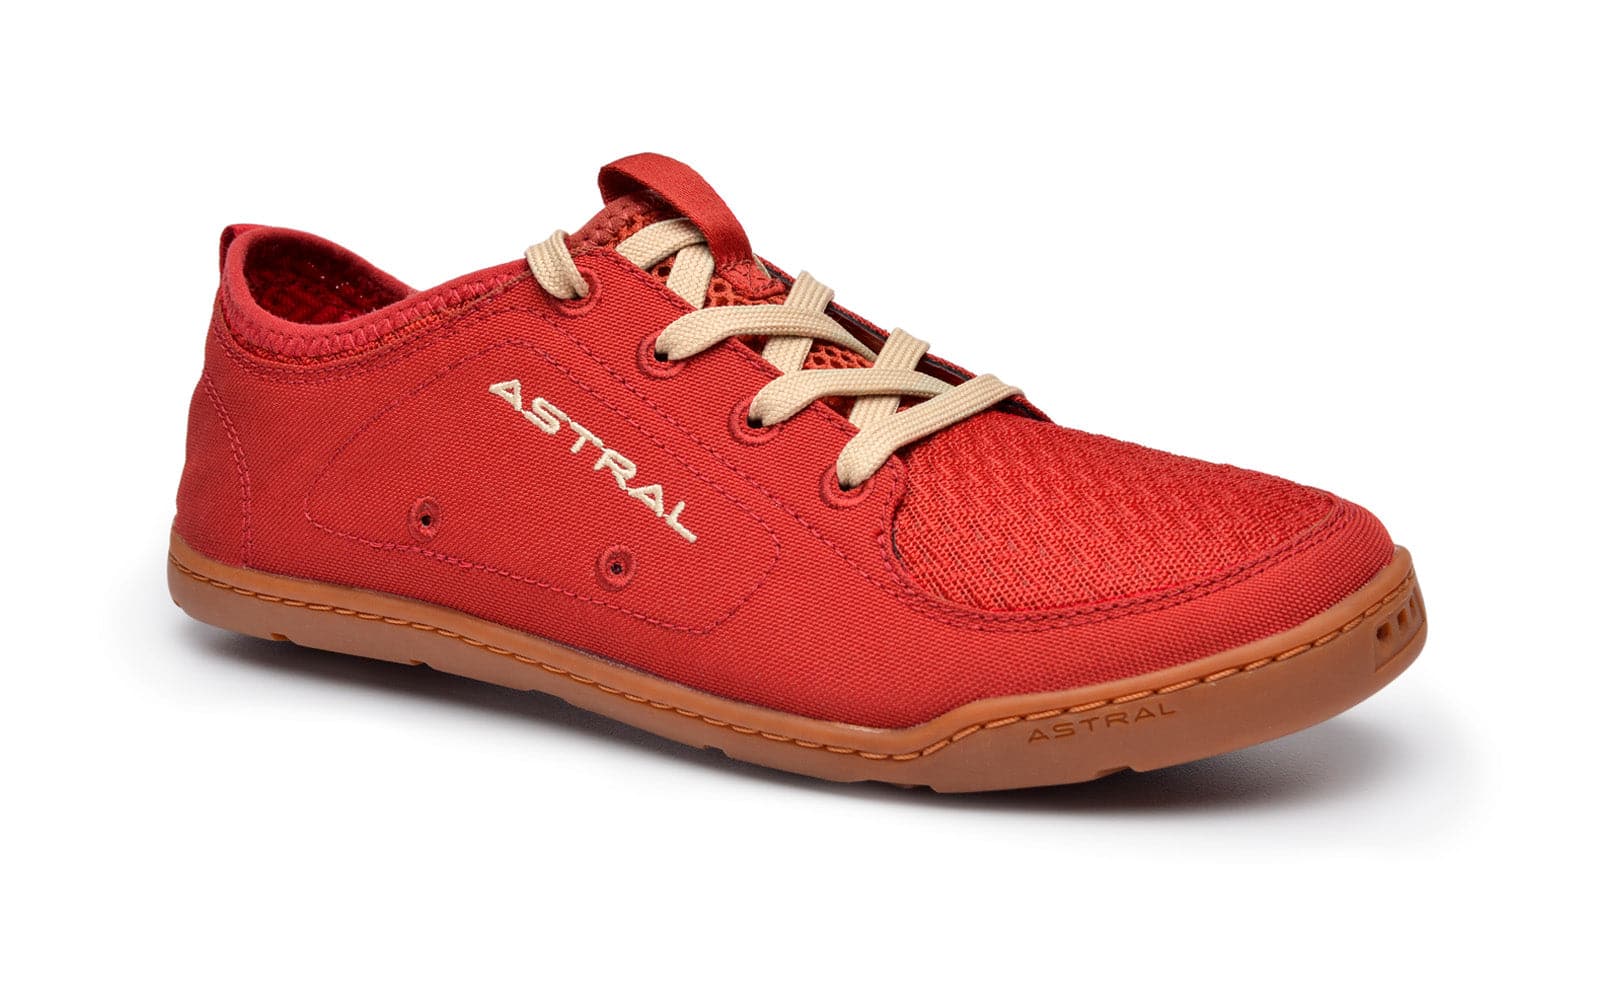 Featuring the Loyak - Women's women's footwear manufactured by Astral shown here from an eighth angle.